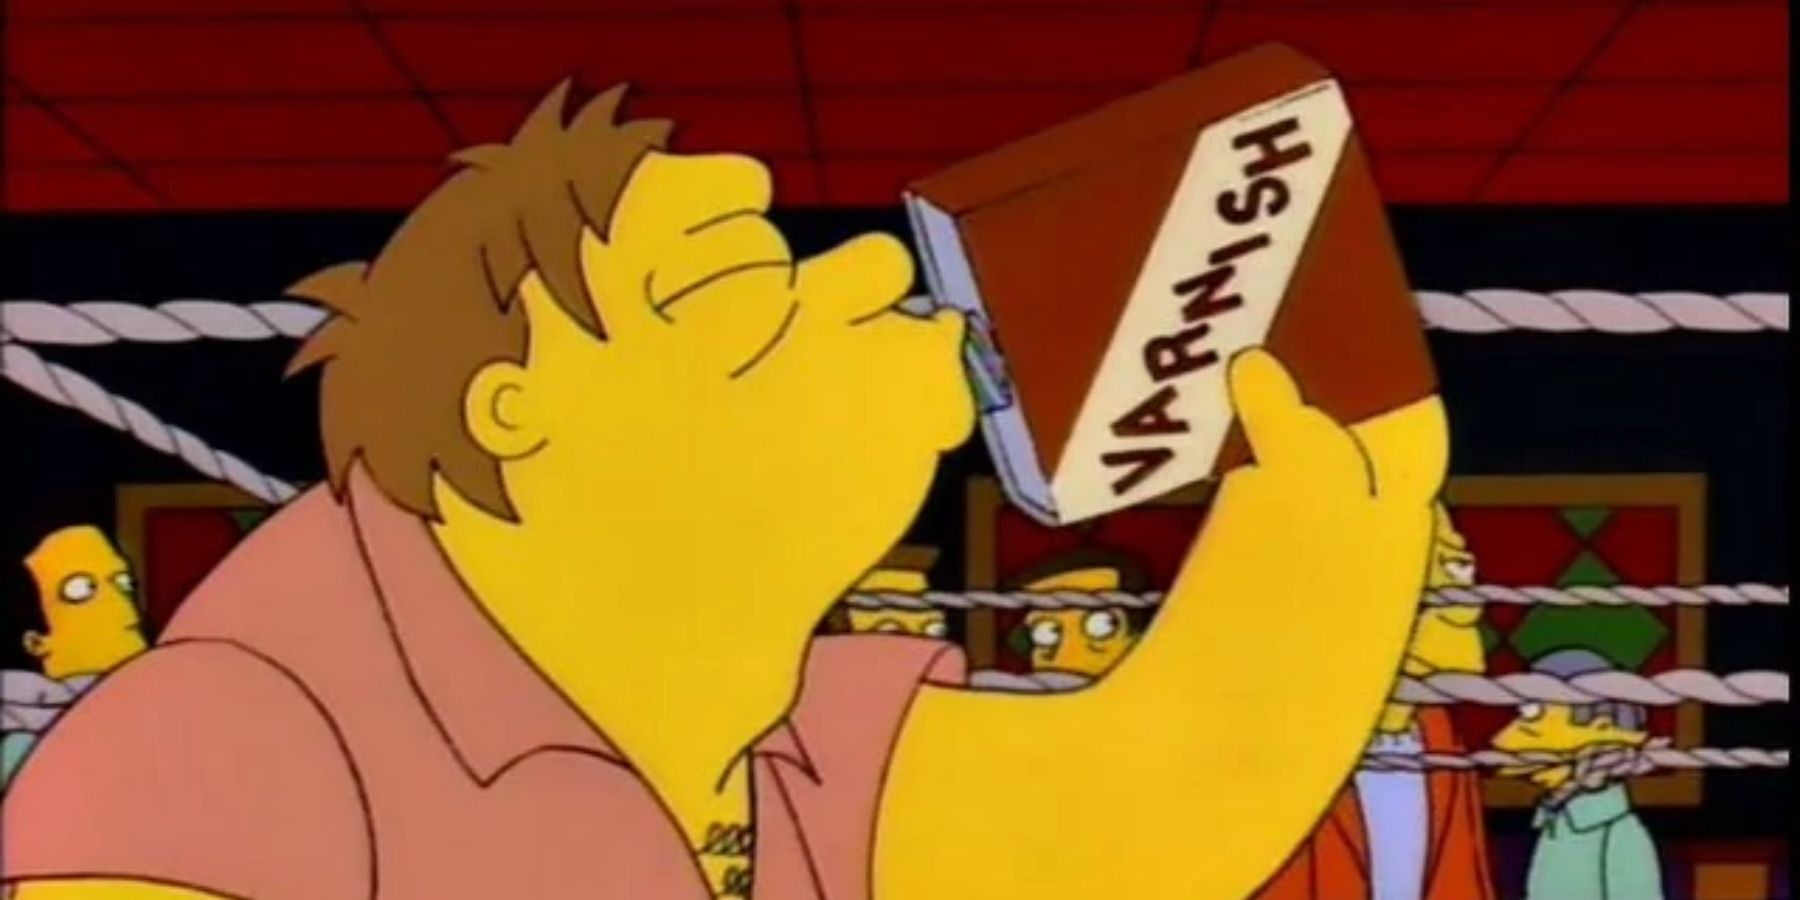 Barney drinking Varnish in the Simpsons